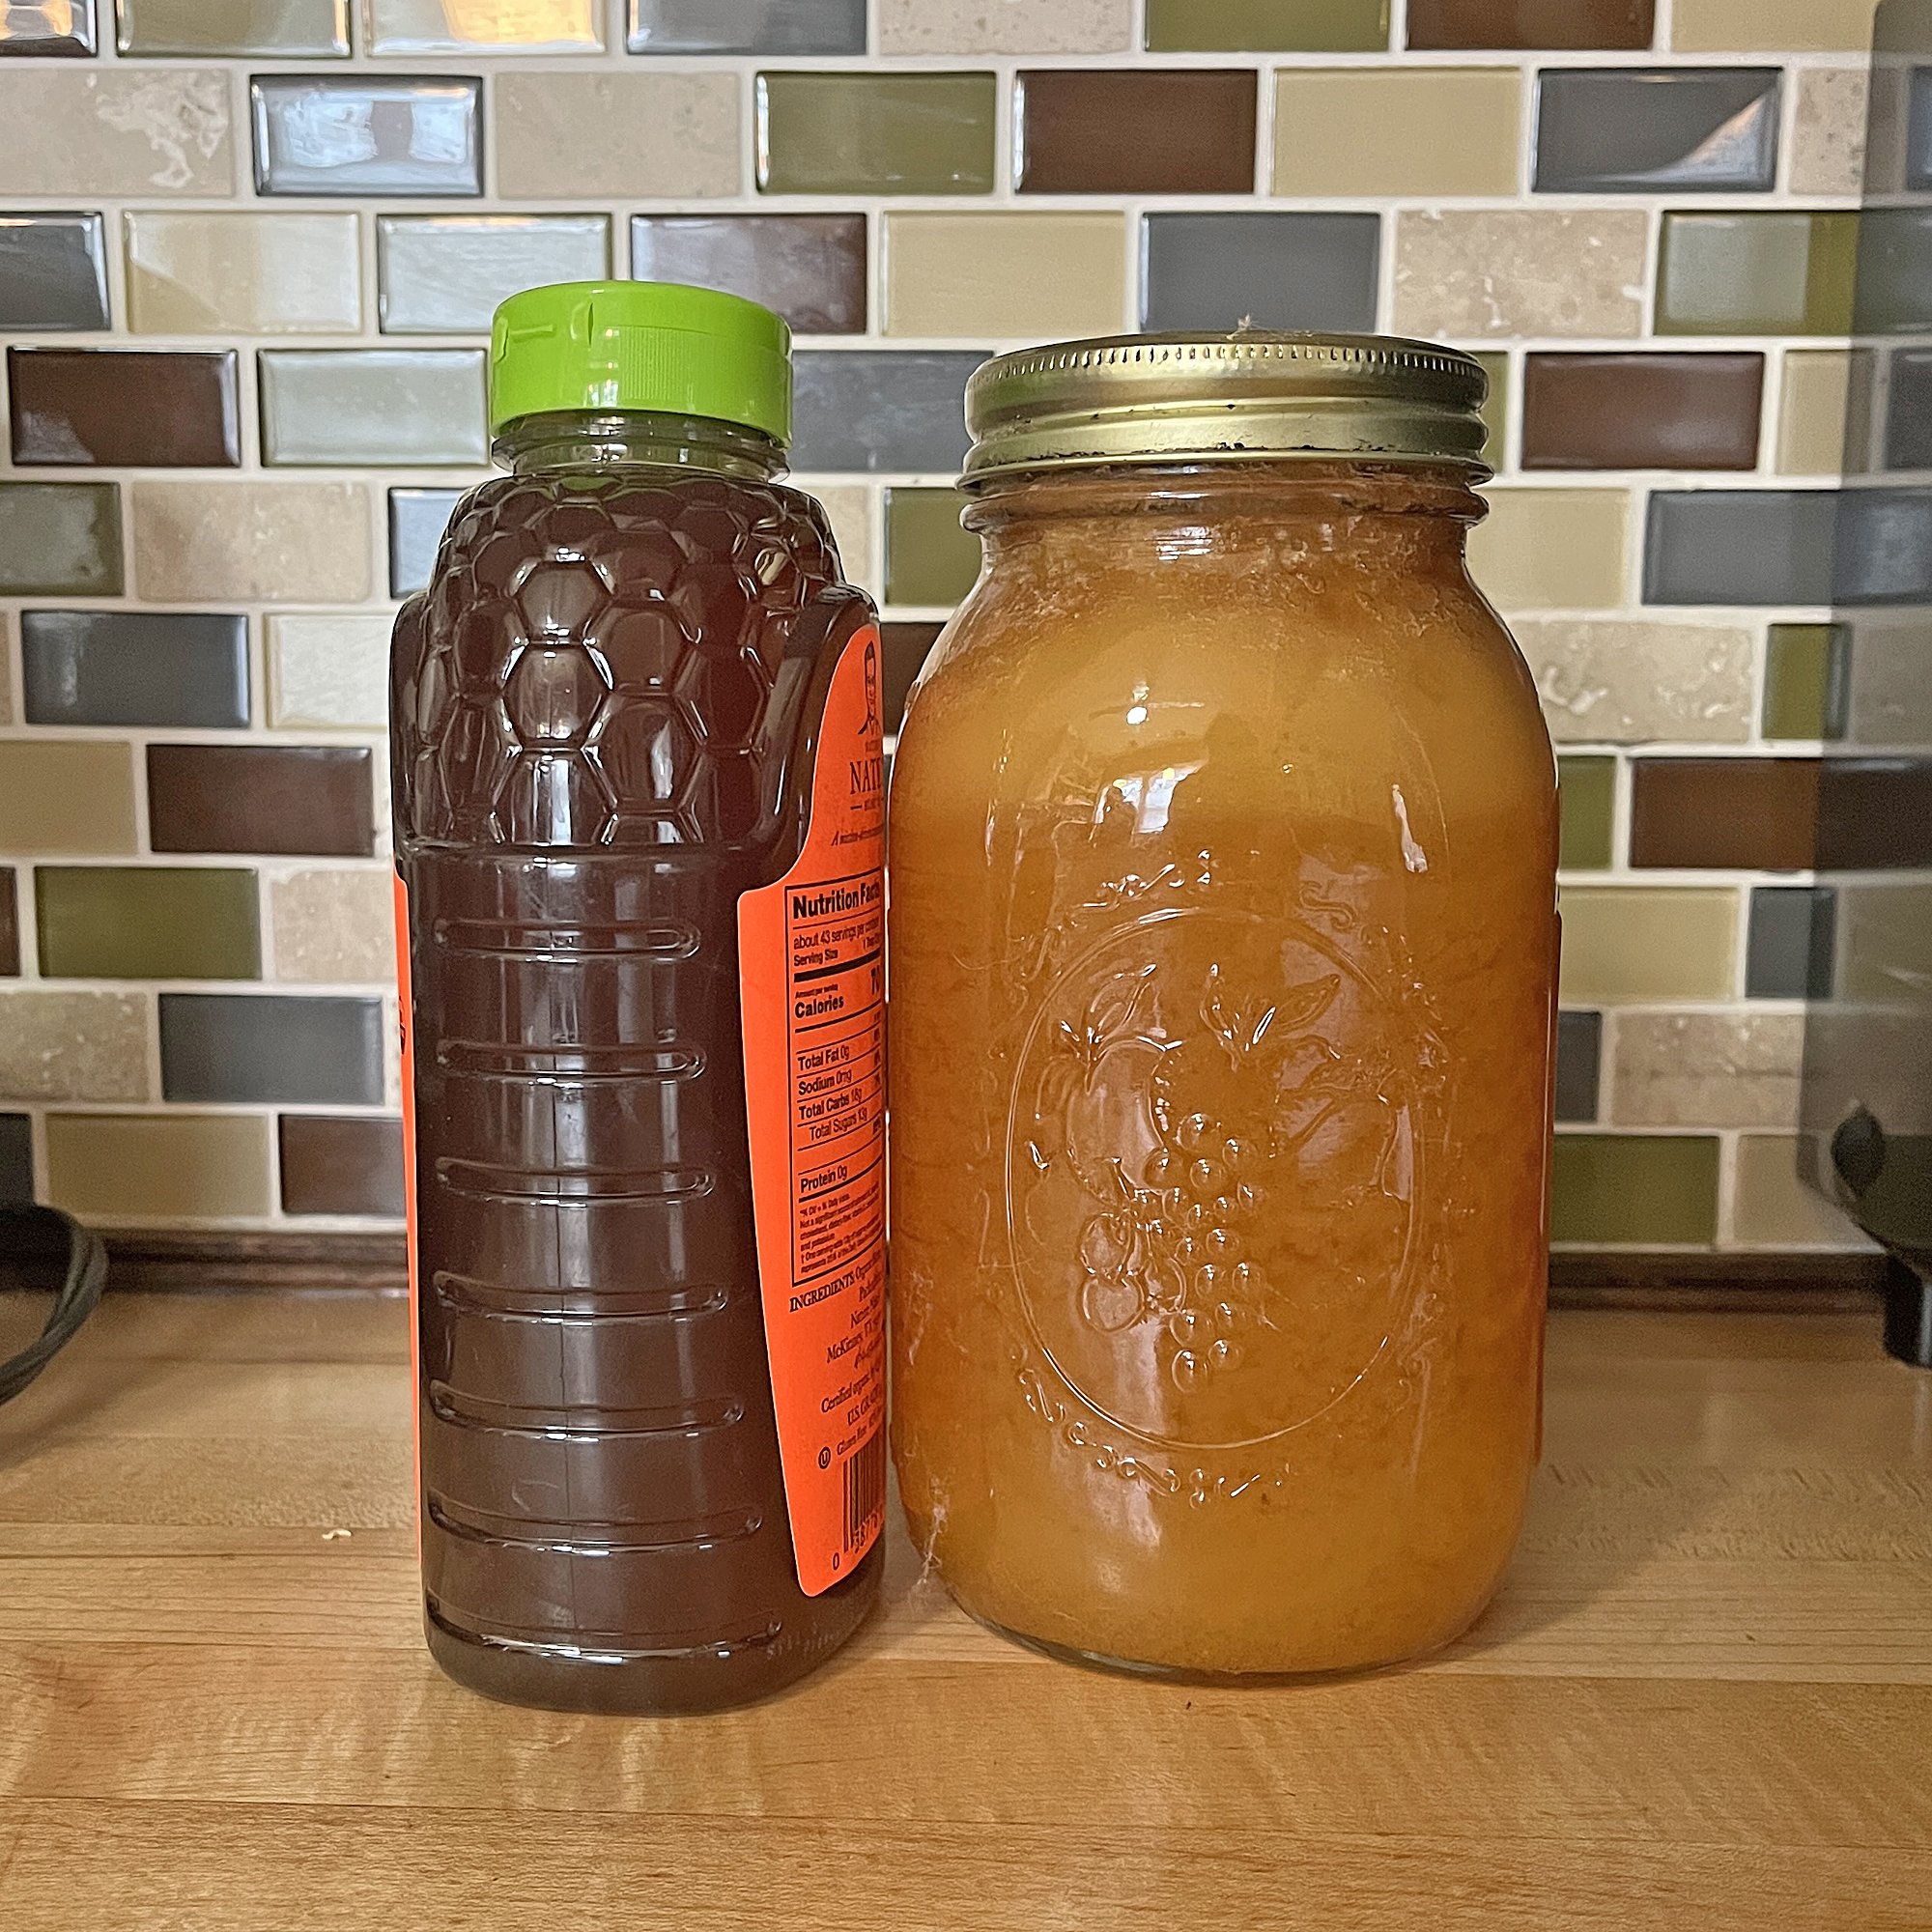 Both are raw unfiltered honey, but what's in the Ball jar is so crystalized, it's almost solid.